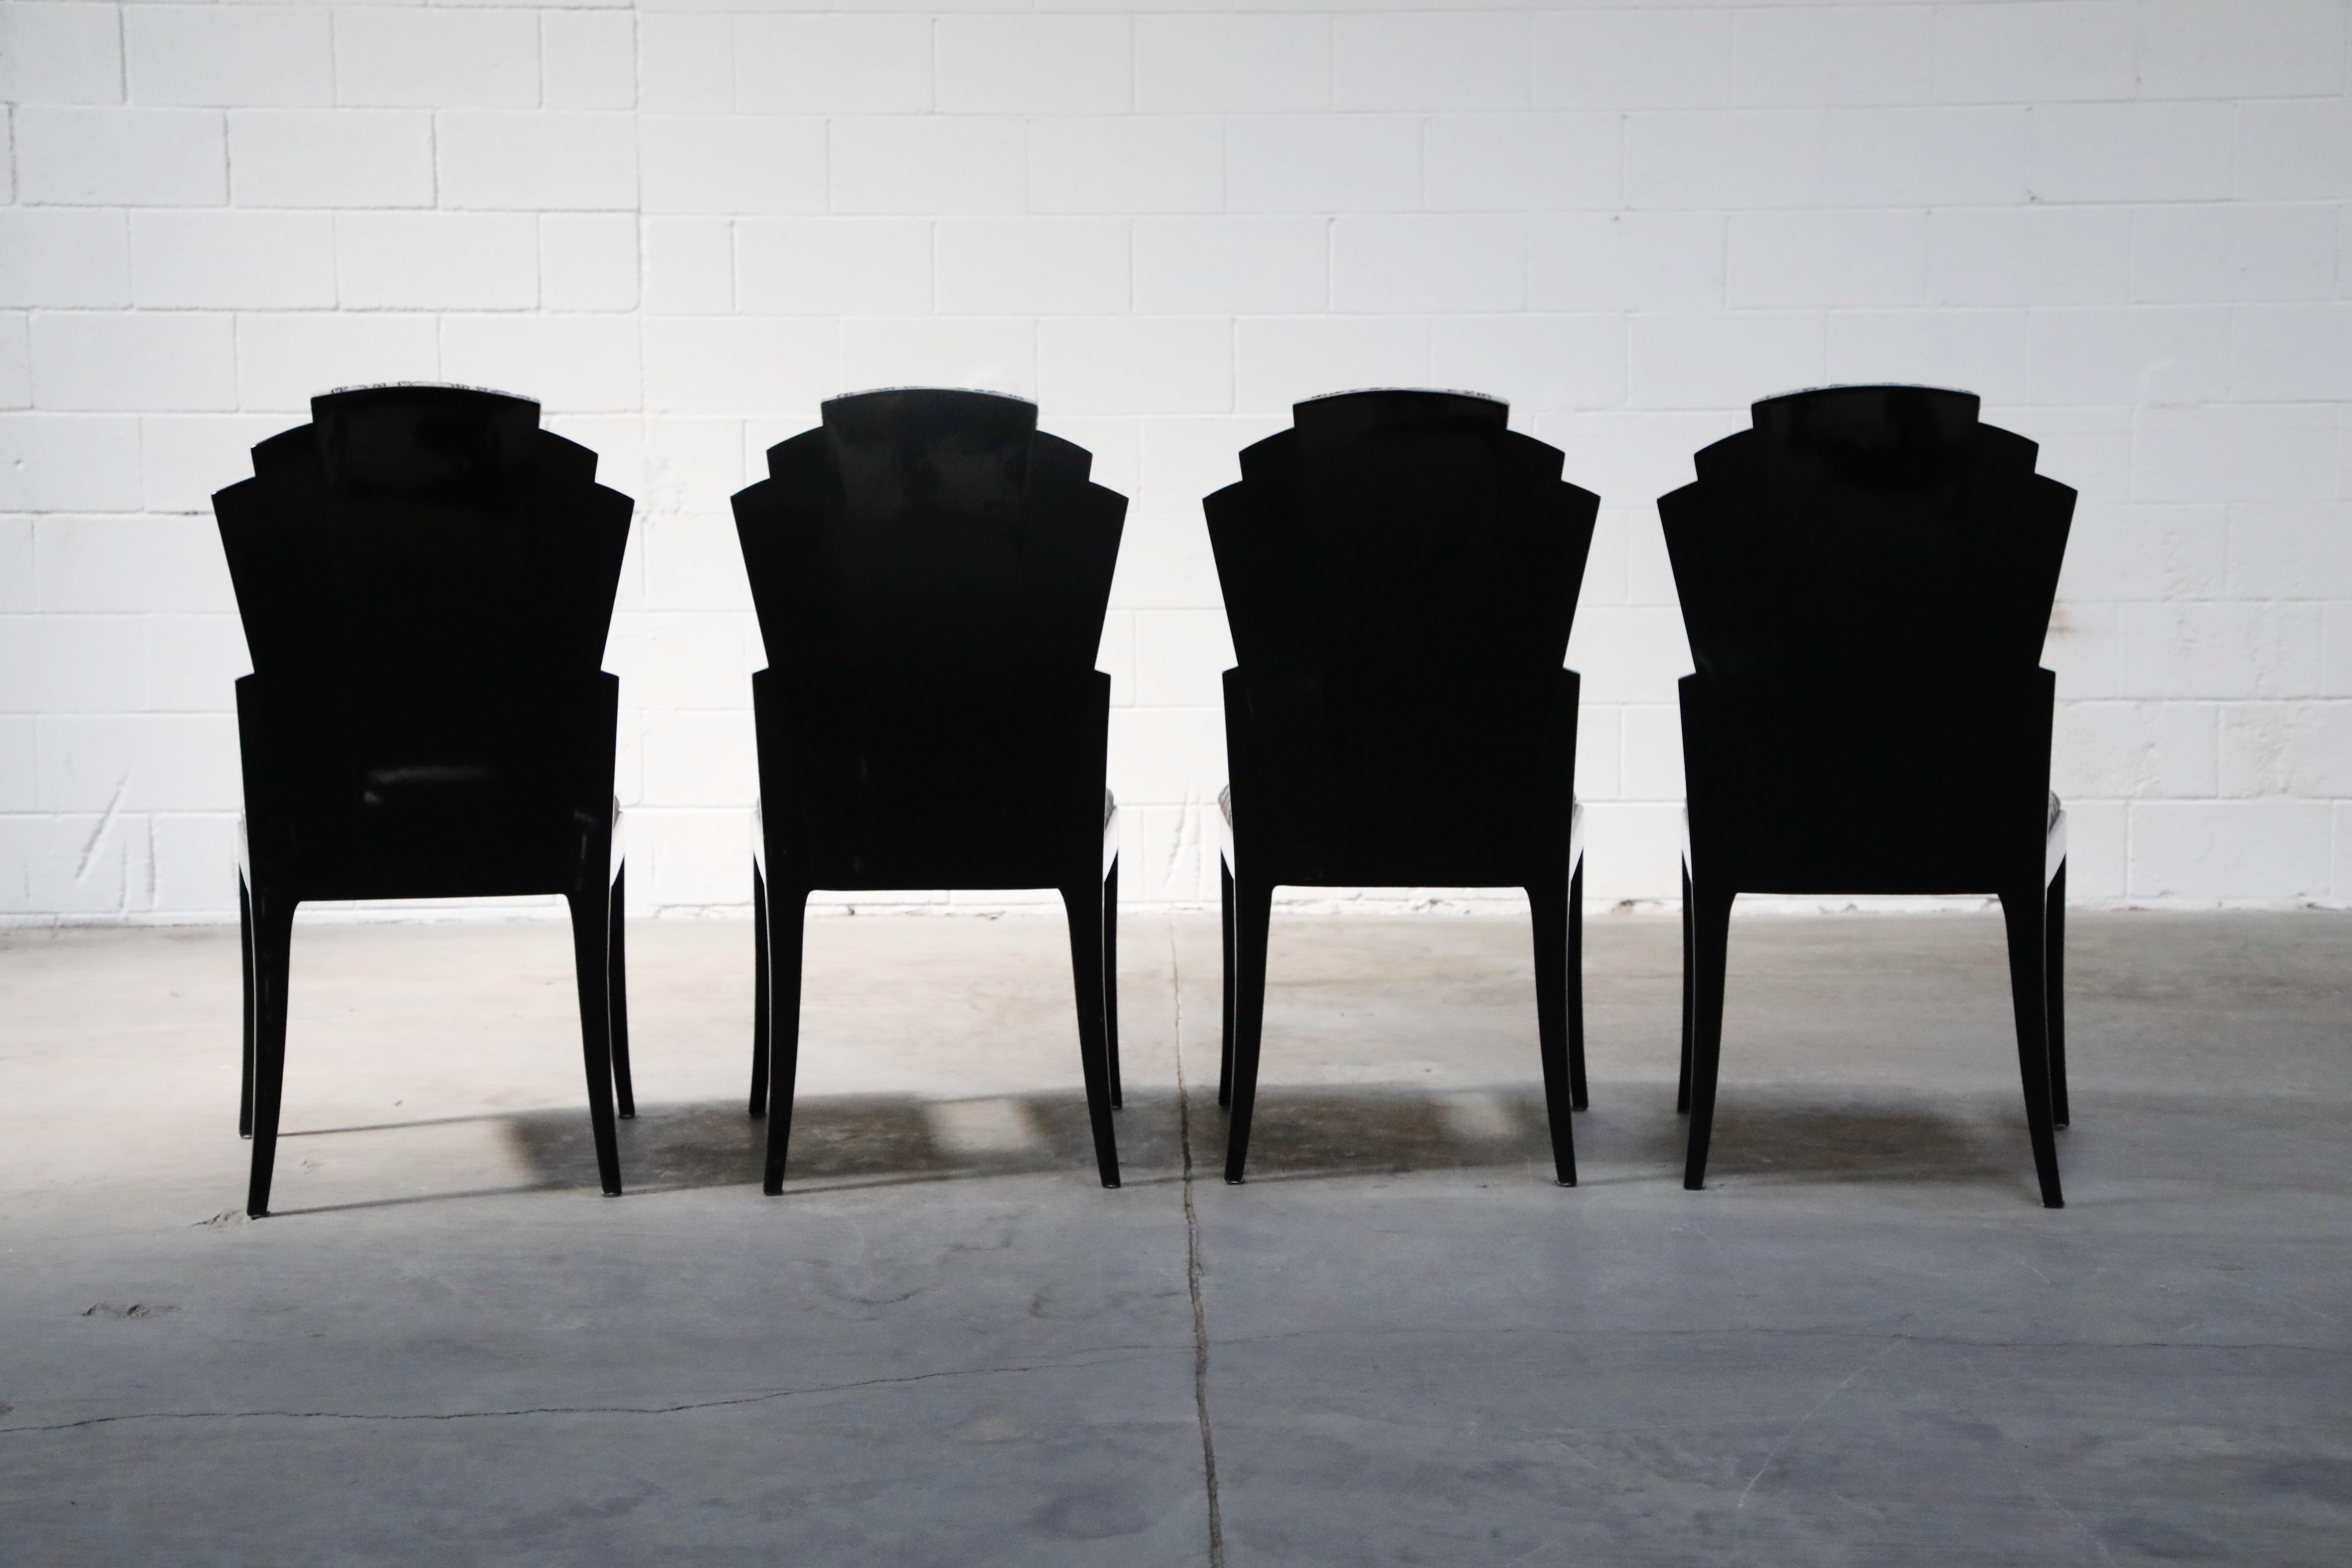 Lacquer Vladimir Kagan Handmade Postmodern Dining Chairs, Set of Eight, 1980s, Signed For Sale